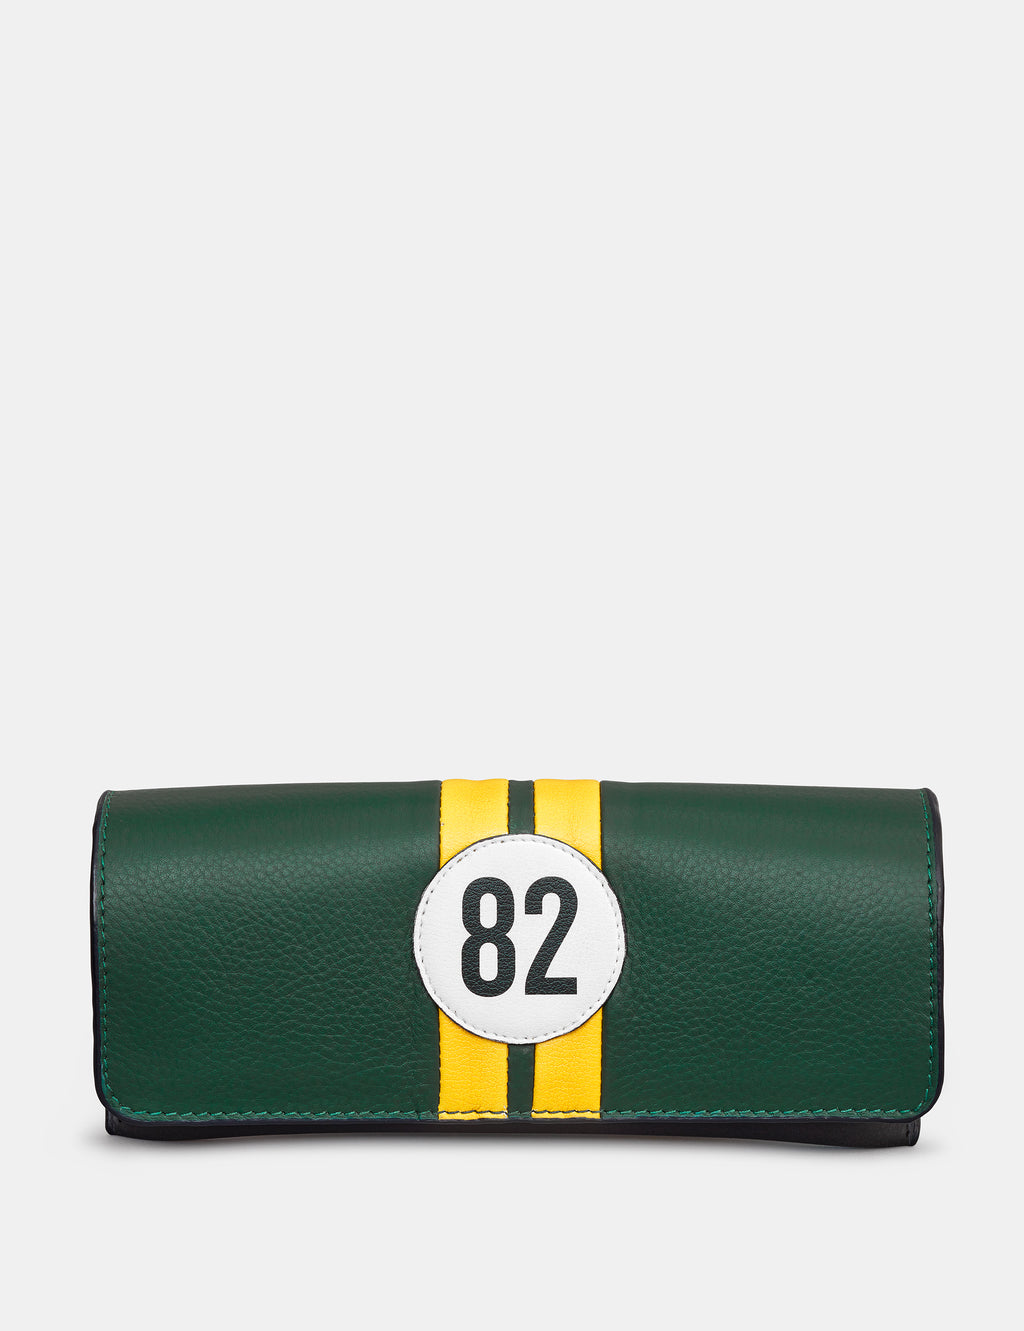 Car Livery No. 82 Leather Glasses Case